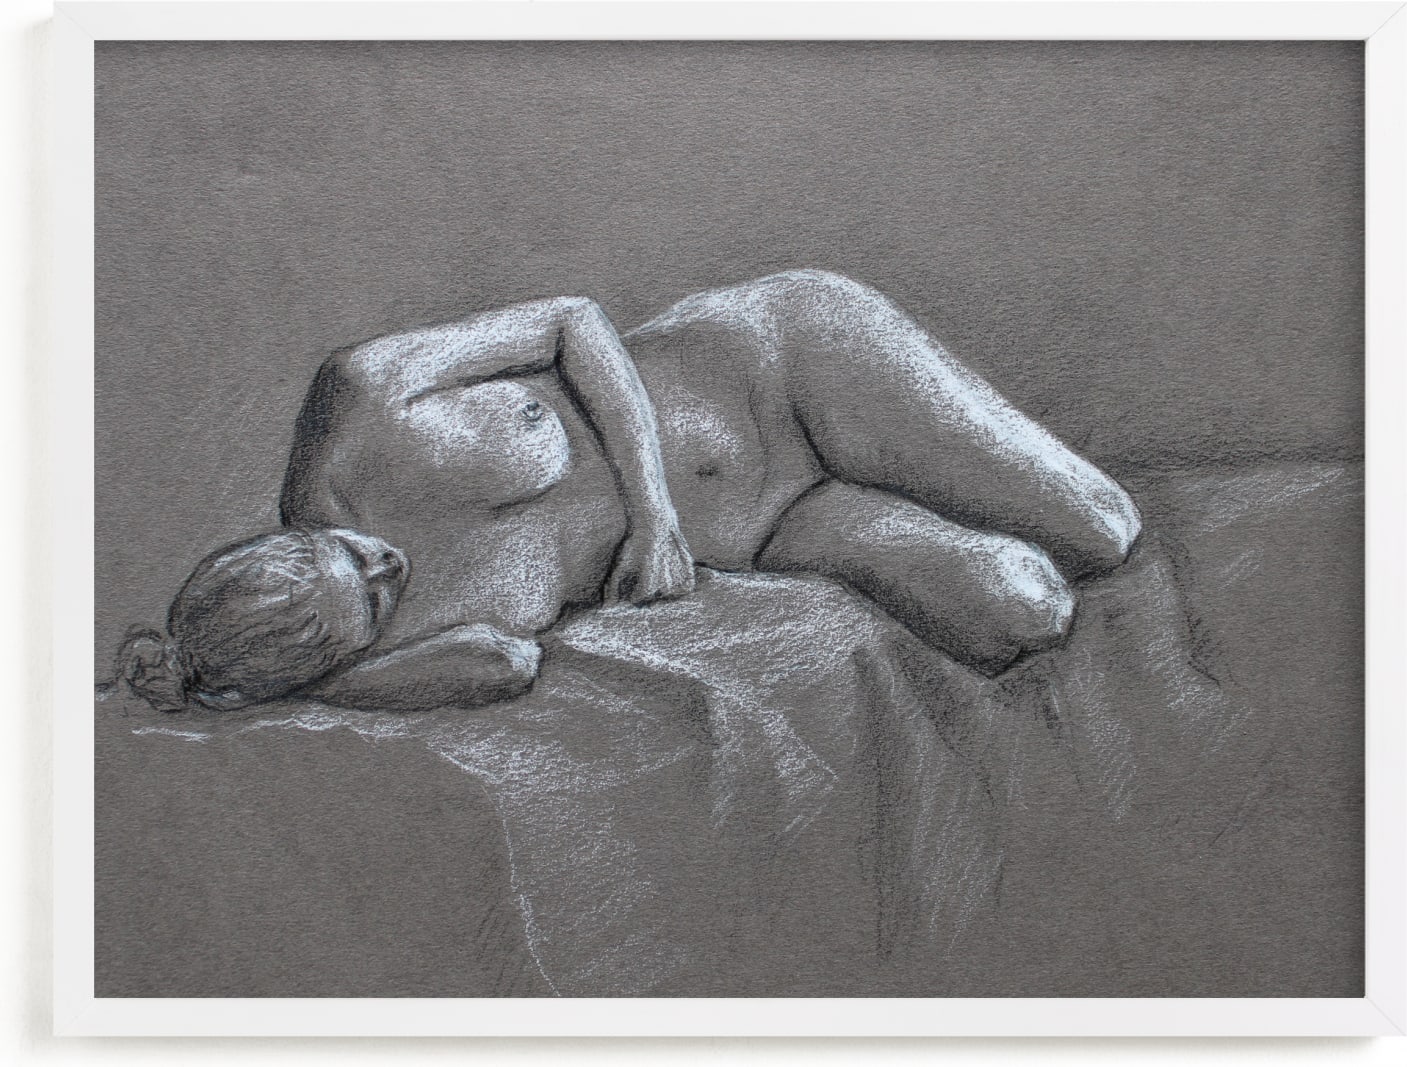 This is a black and white art by Anne Morrison called Restful.